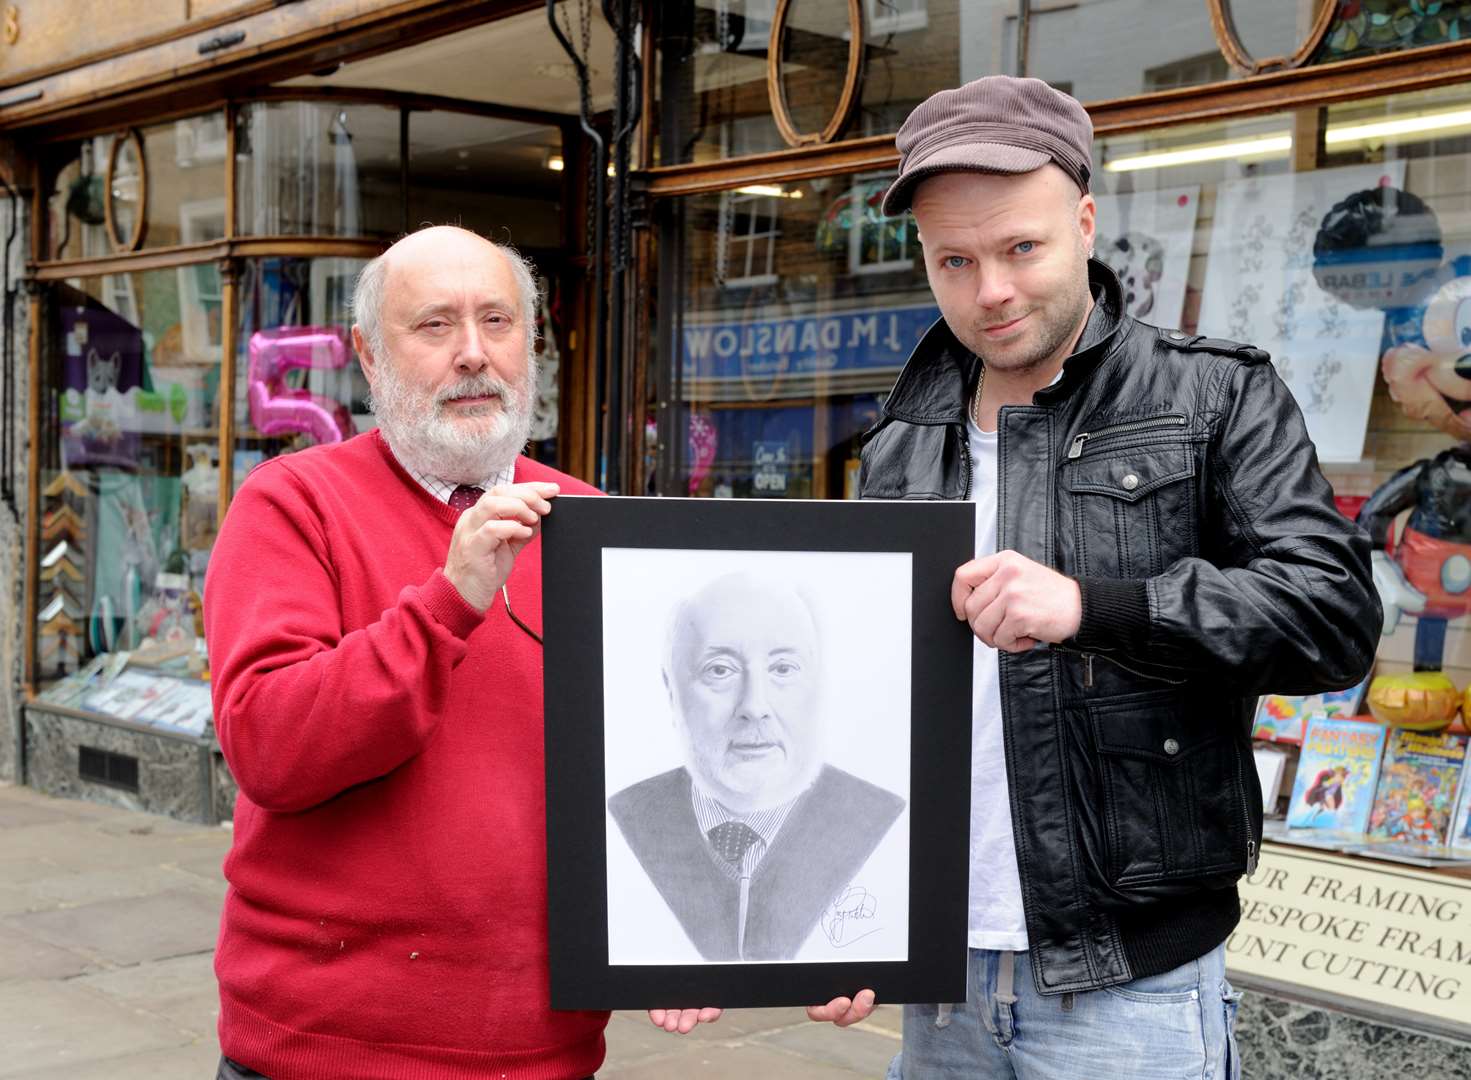 Artist draws on his skills to thank kind shop owner 